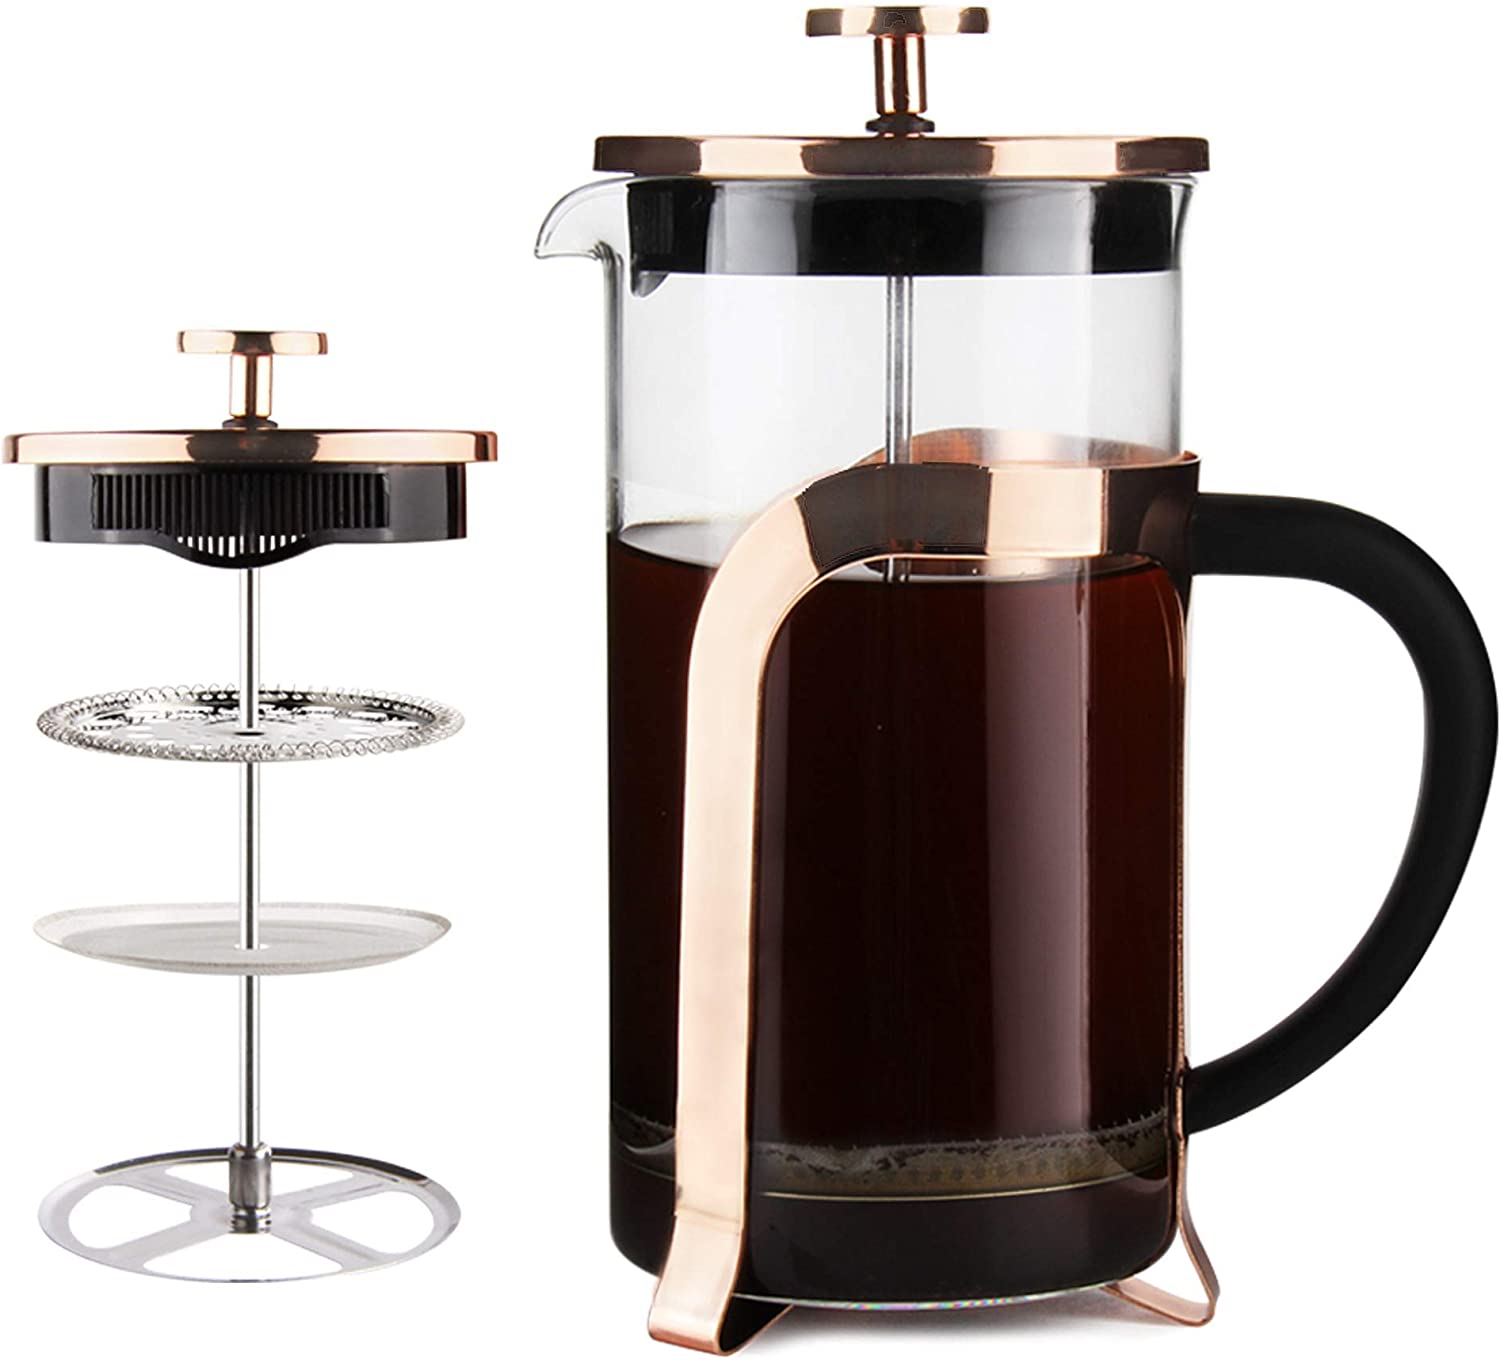 KONA French Press Coffee Maker With Reusable Stainless Steel